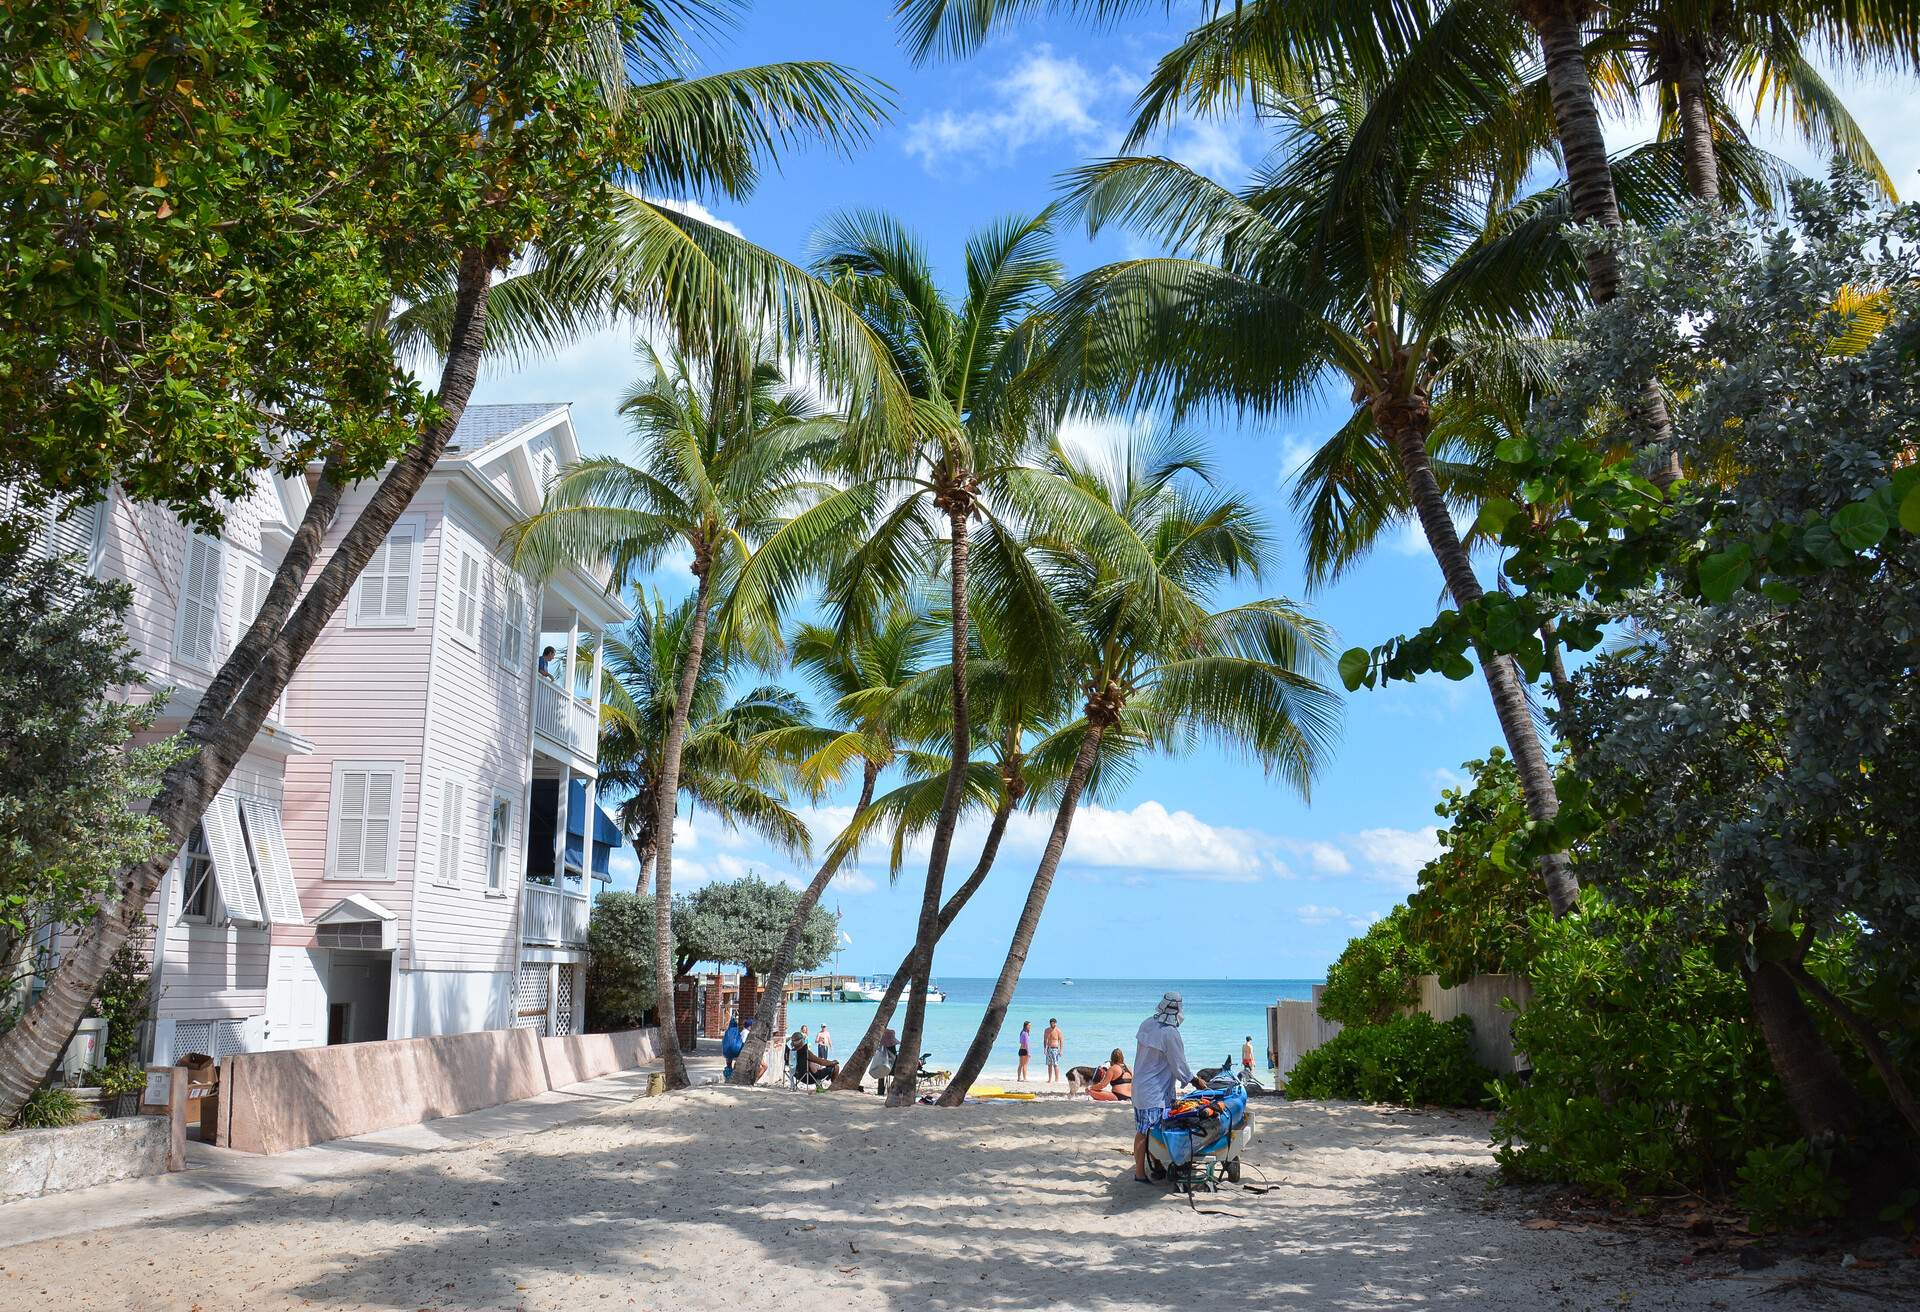 People relax on a beach under a grove of palm trees beside a white beach house.